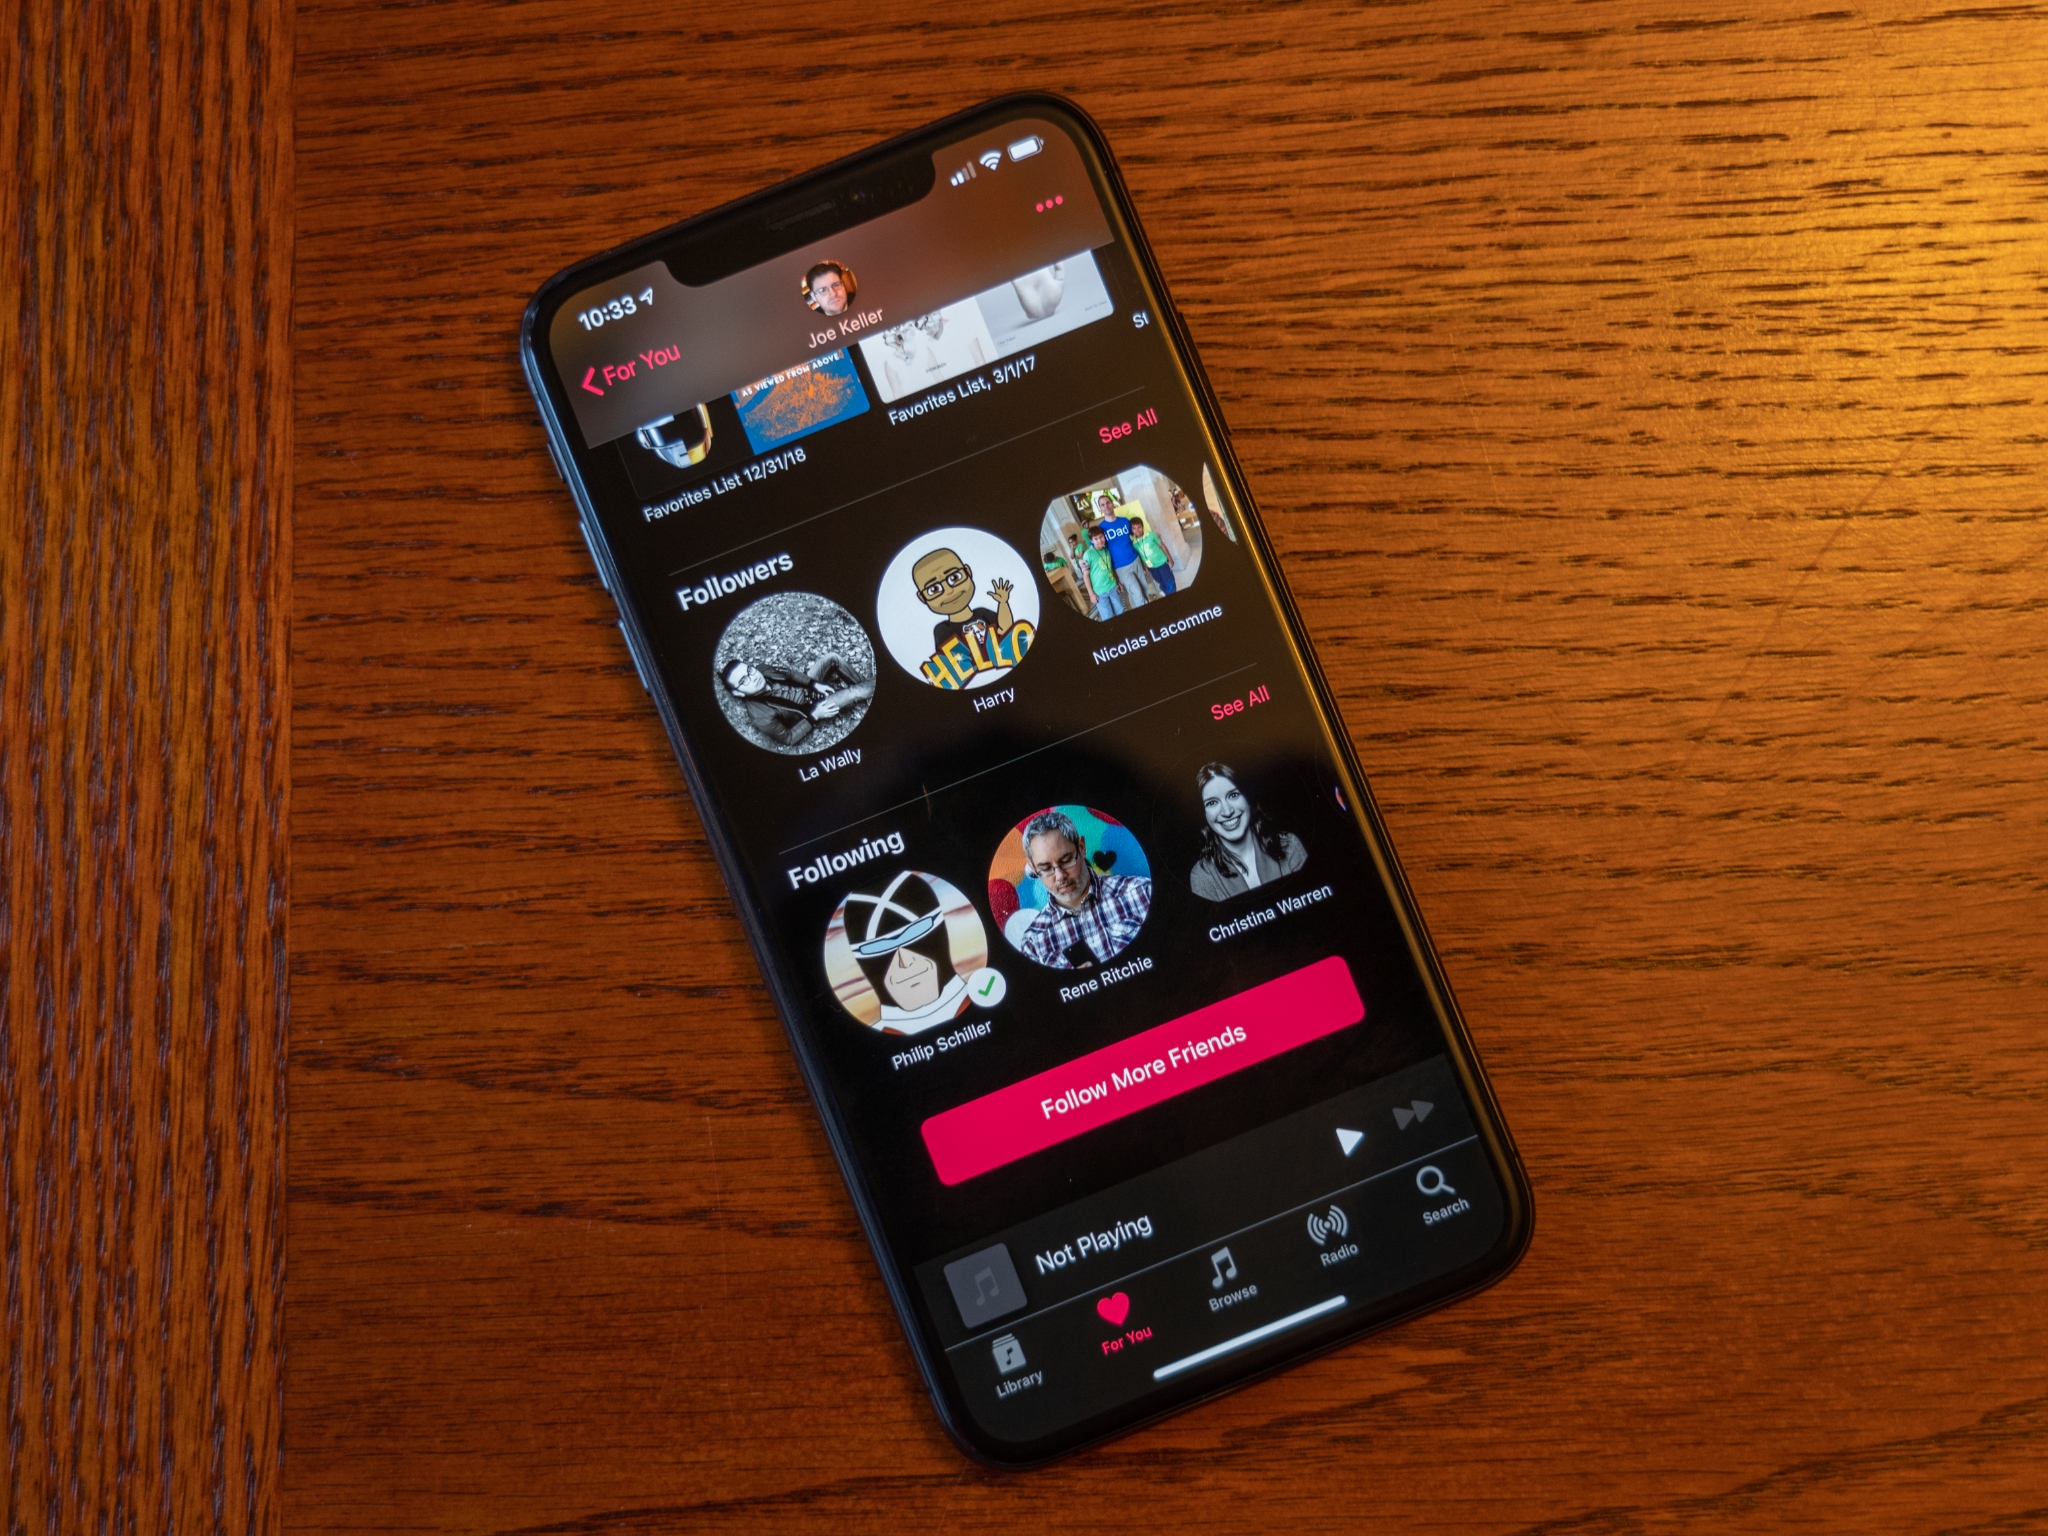 How to follow friends (and find new ones) in Apple Music